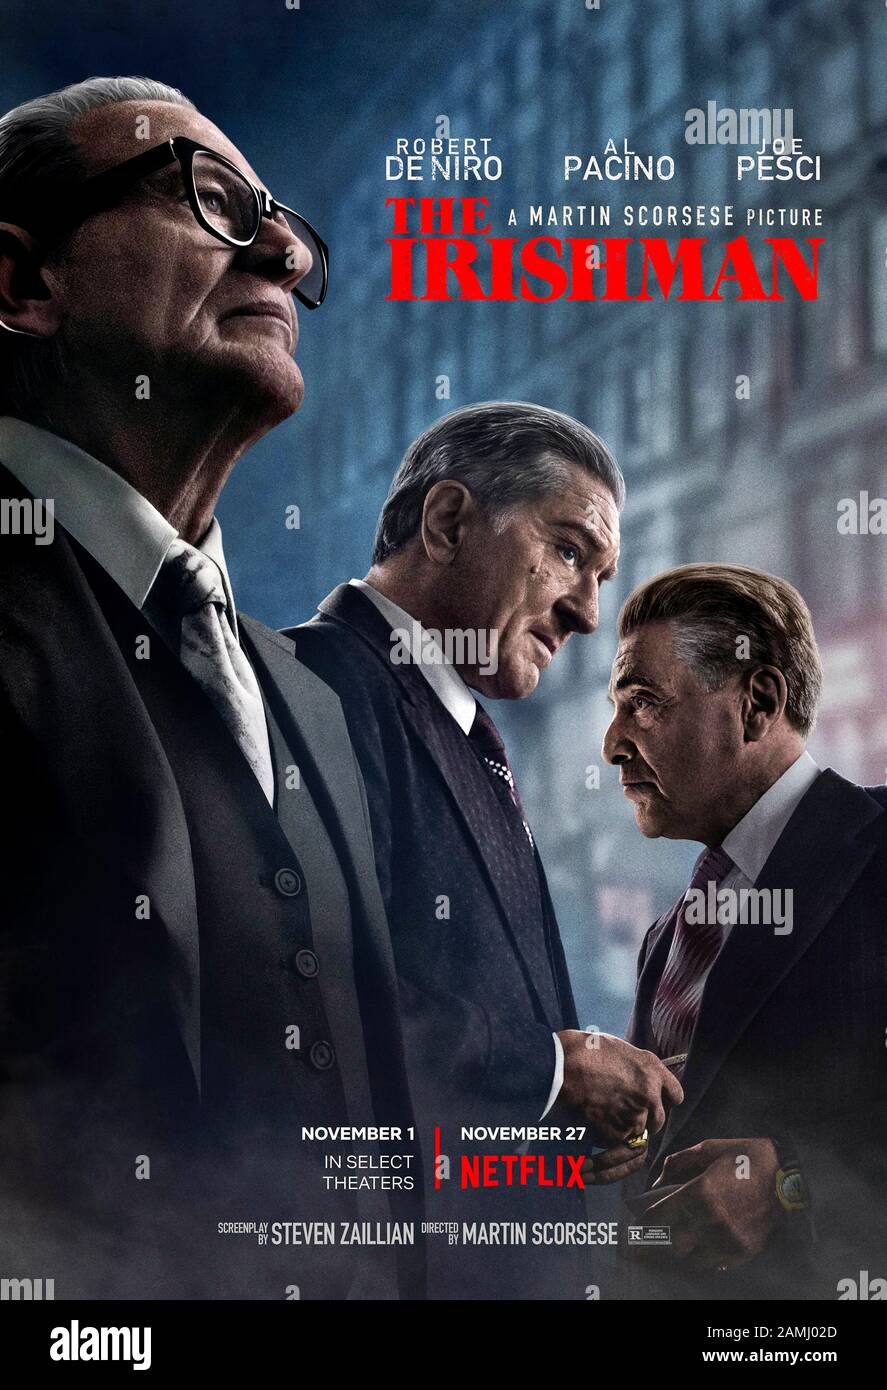 The Irishman (2019) directed by Martin Scorsese and starring Robert De Niro, Al Pacino, Joe Pesci and Harvey Keitel. Critically acclaimed crime drama about Frank Sheeran’s involvement in the death of Jimmy Hoffa based on the 2004 book I Heard You Paint Houses by Charles Brandt. Stock Photo